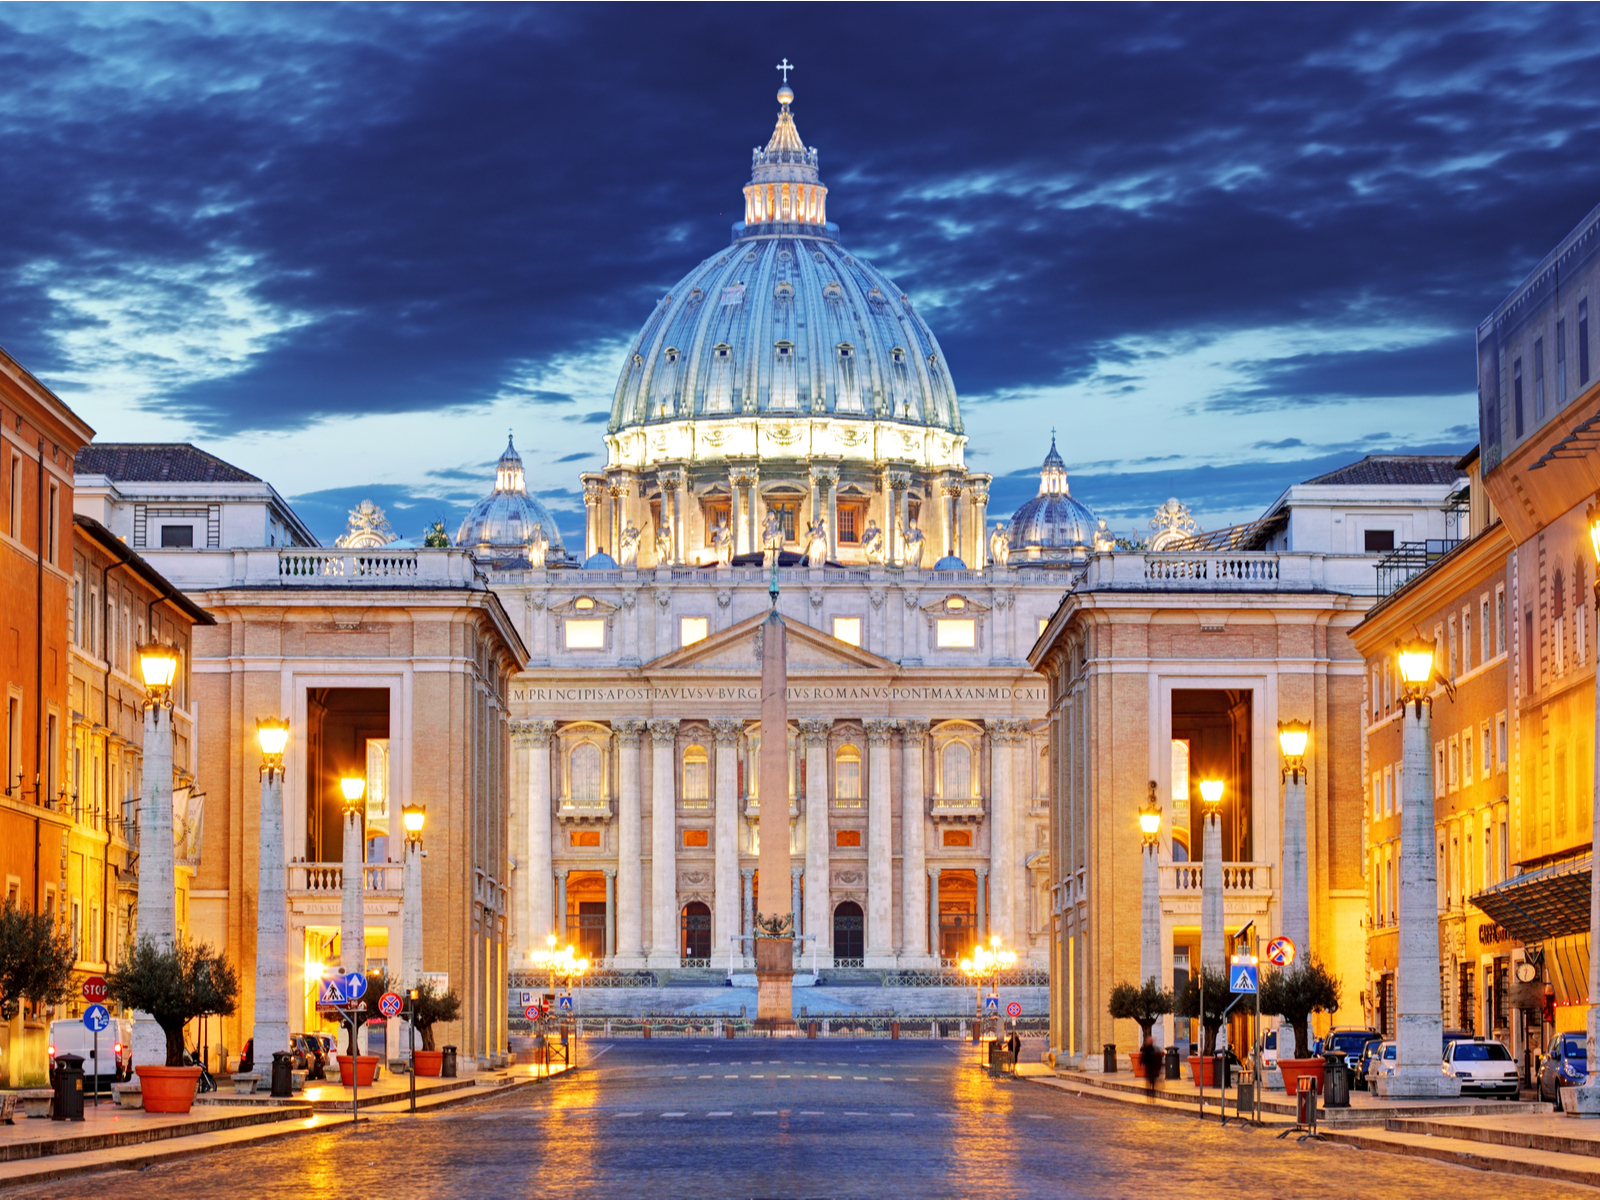 Papal Basilica of Saint Peter in the Vatican pictured during the best time to visit Rome